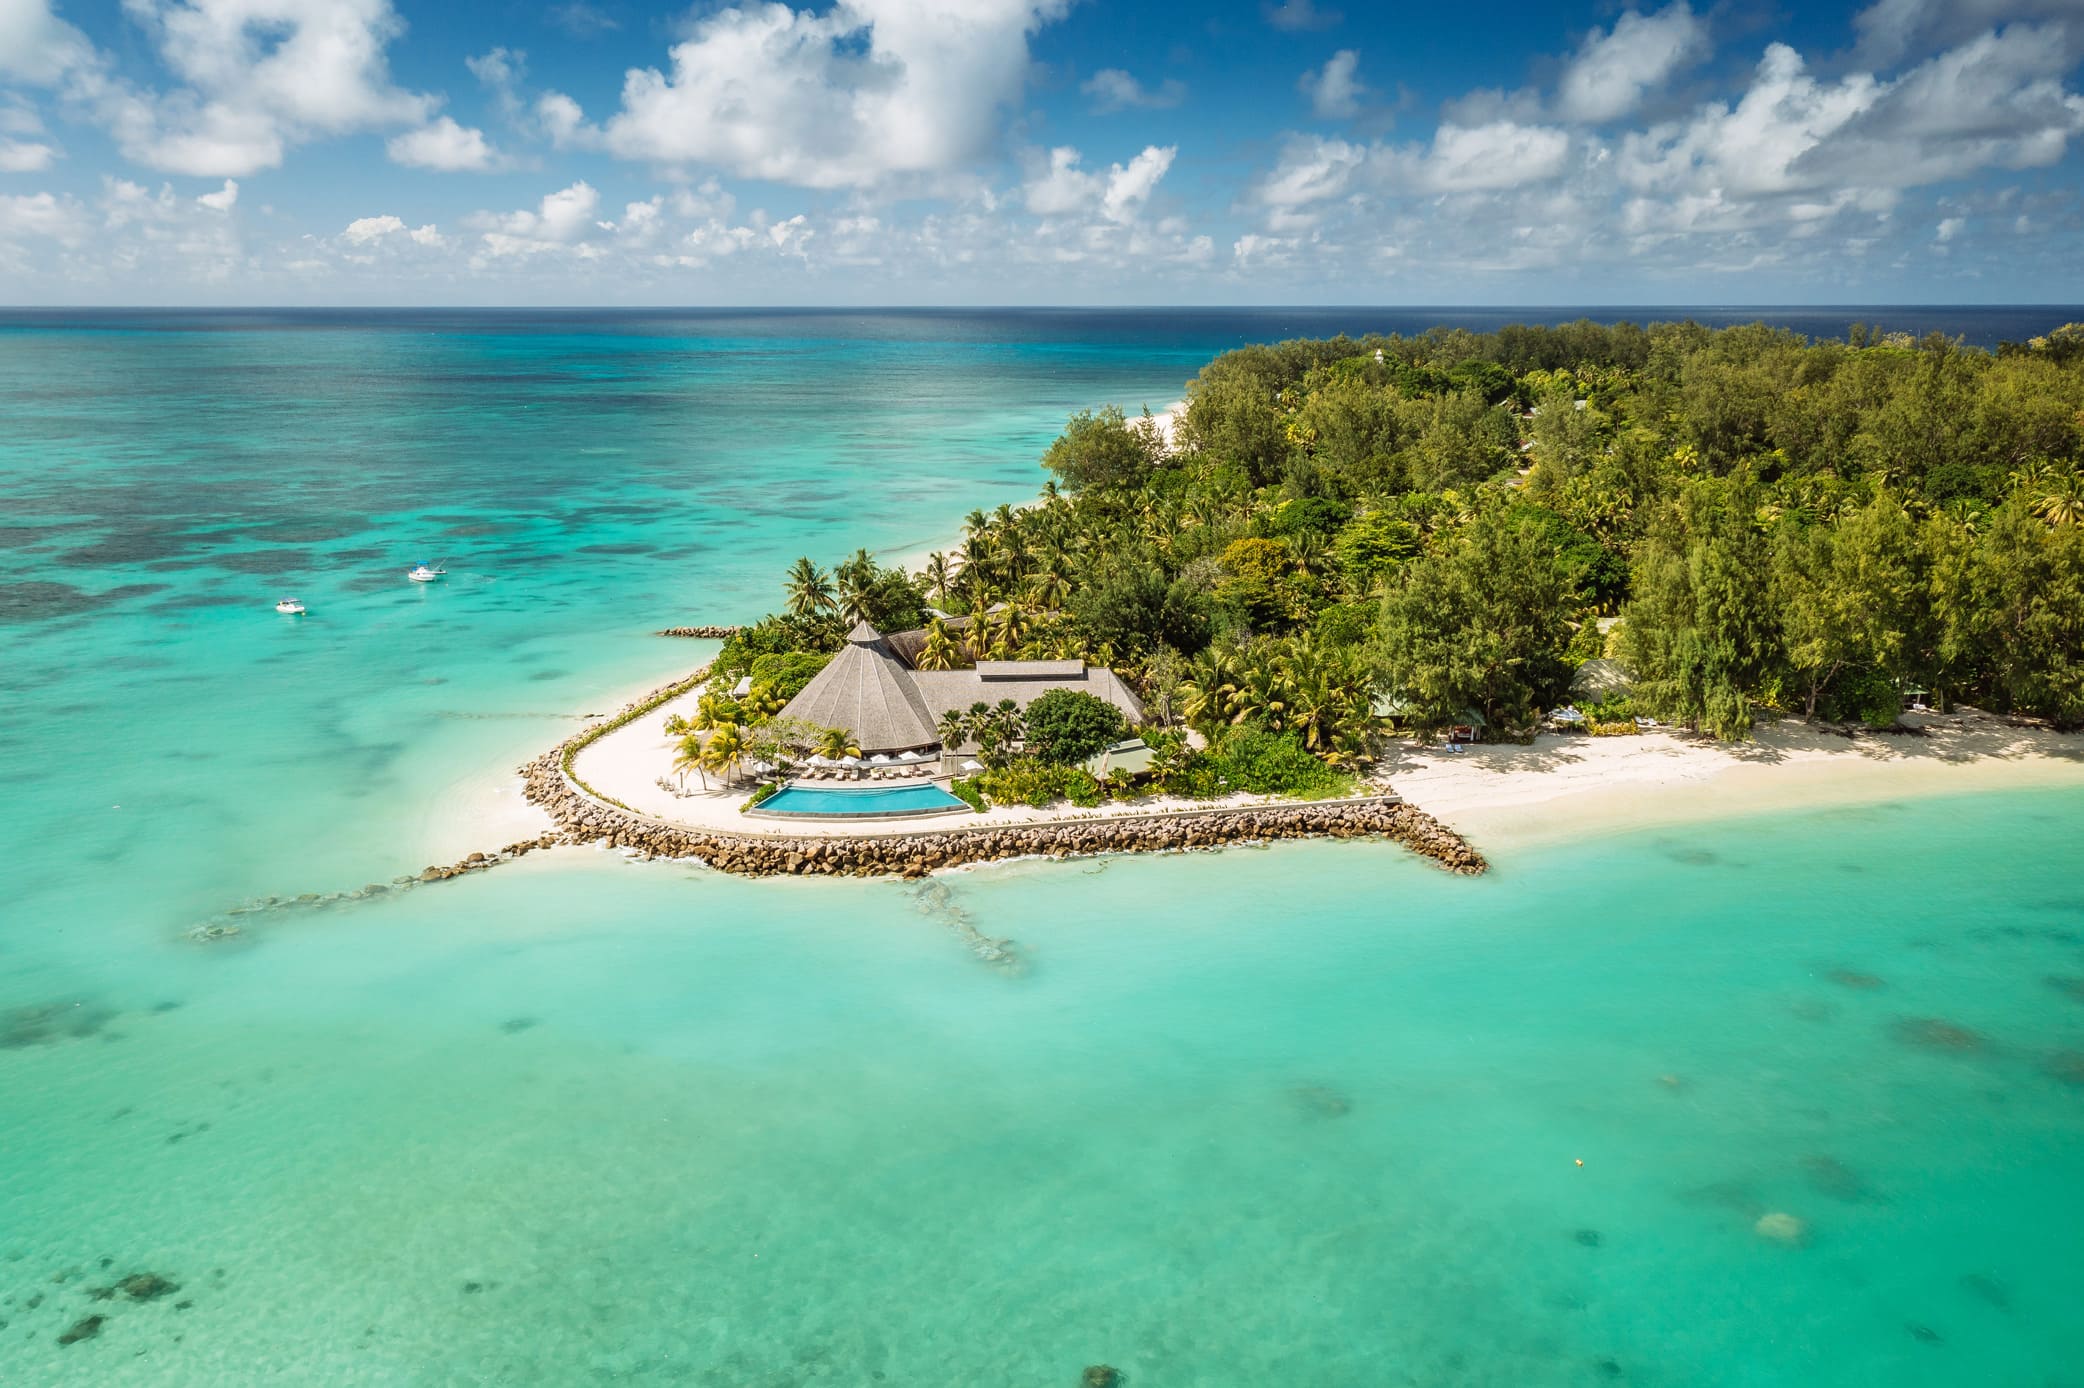 Luxury resort on Denis Island featured in our guide as a tranquil Seychelles beach getaway with unparalleled privacy and natural beauty.